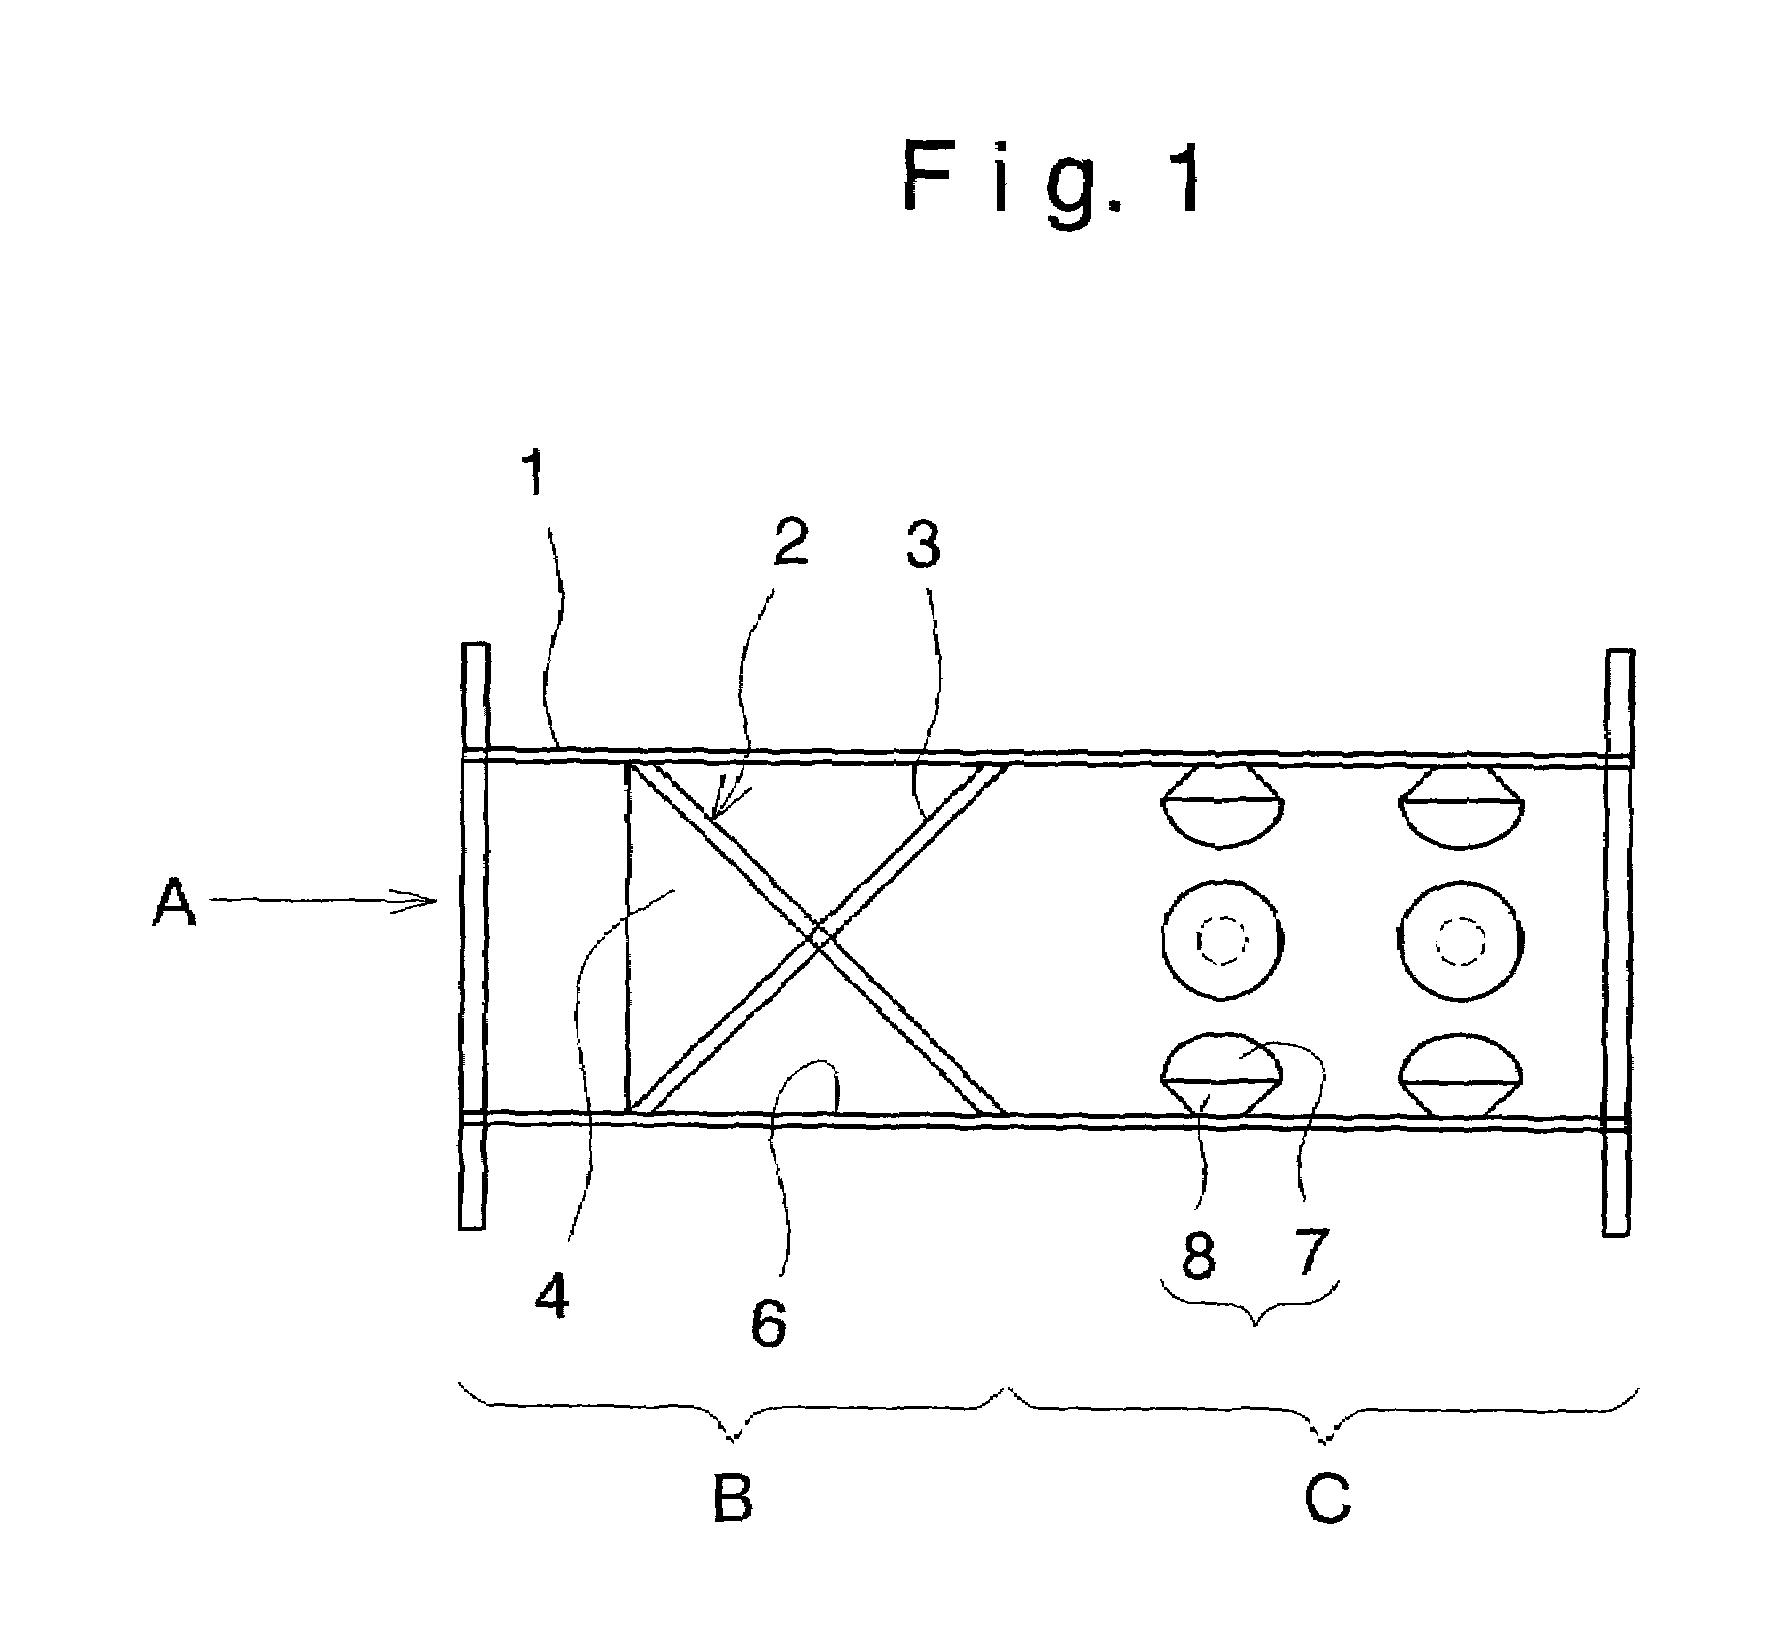 Sewage treatment process by activated-sludge method comprising line atomizing treatment